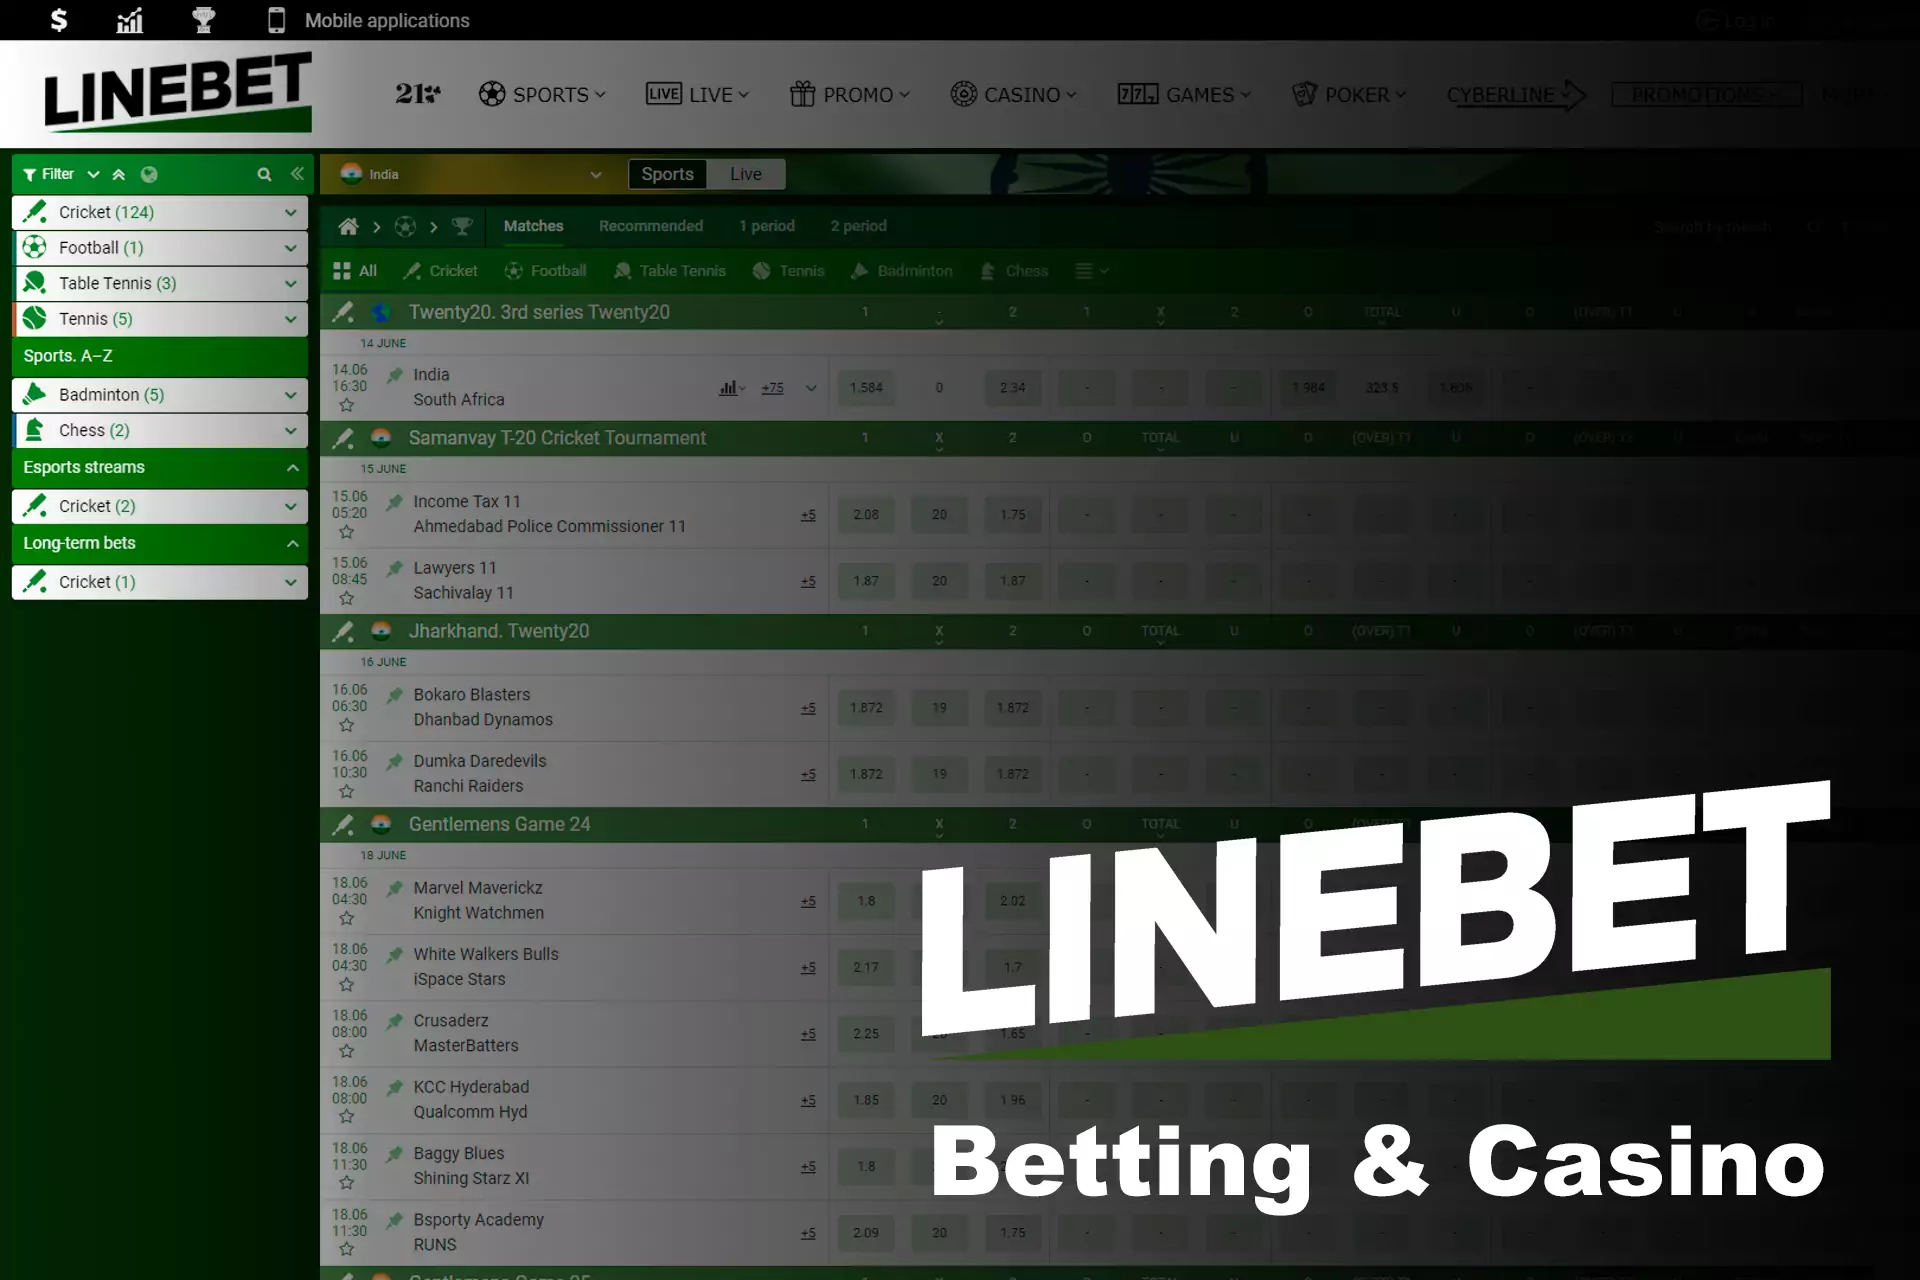 The website of Linebet can be used for both betting and casino games.